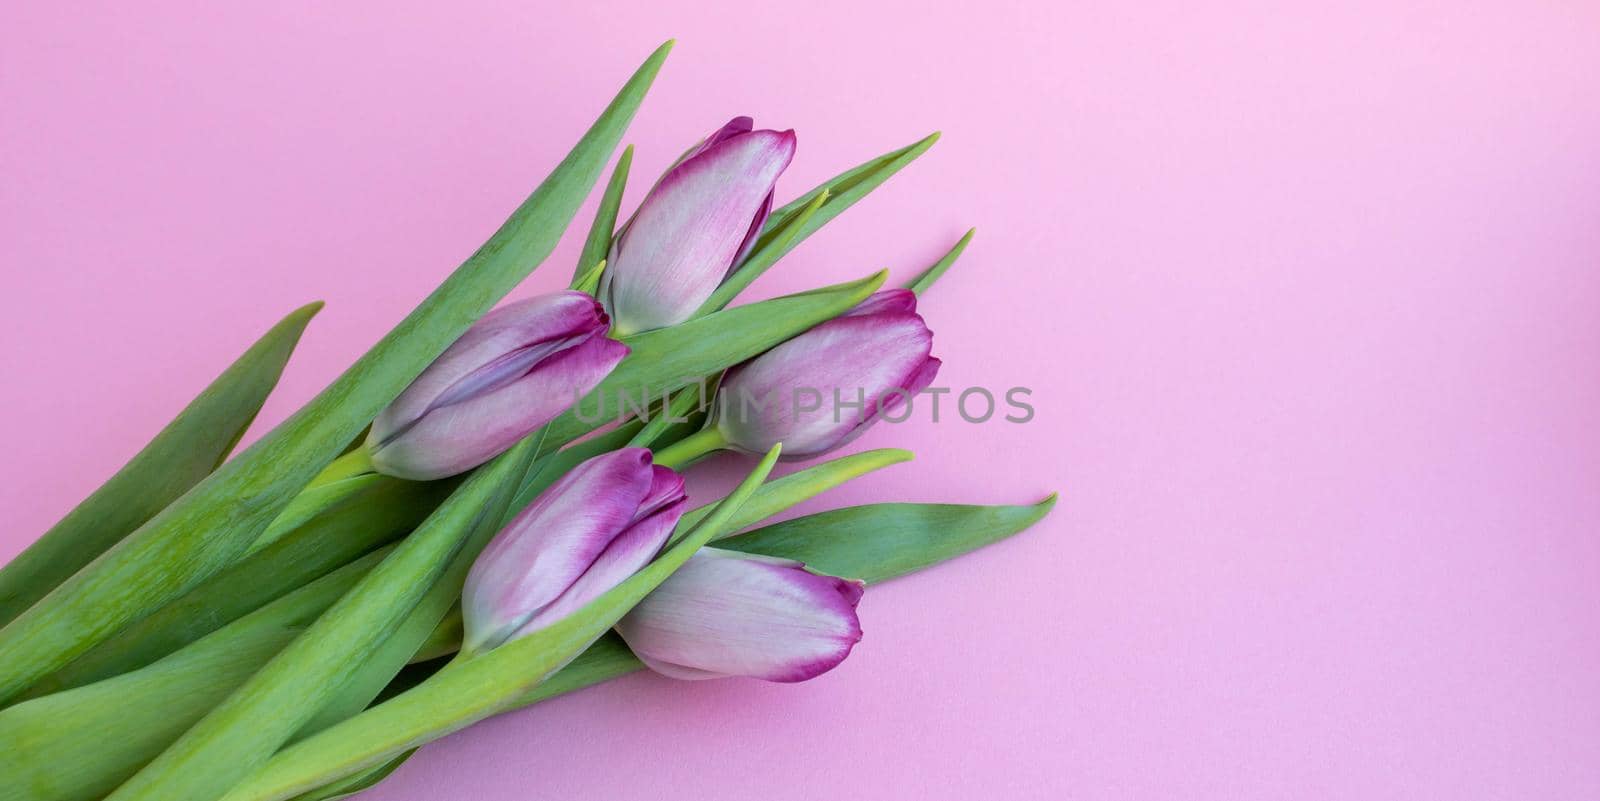 Delicate lilac tulips on a pink background. Greeting card, wallpaper, background. Happy Mother's Day, Easter, Valentine's Day, or wedding by lapushka62